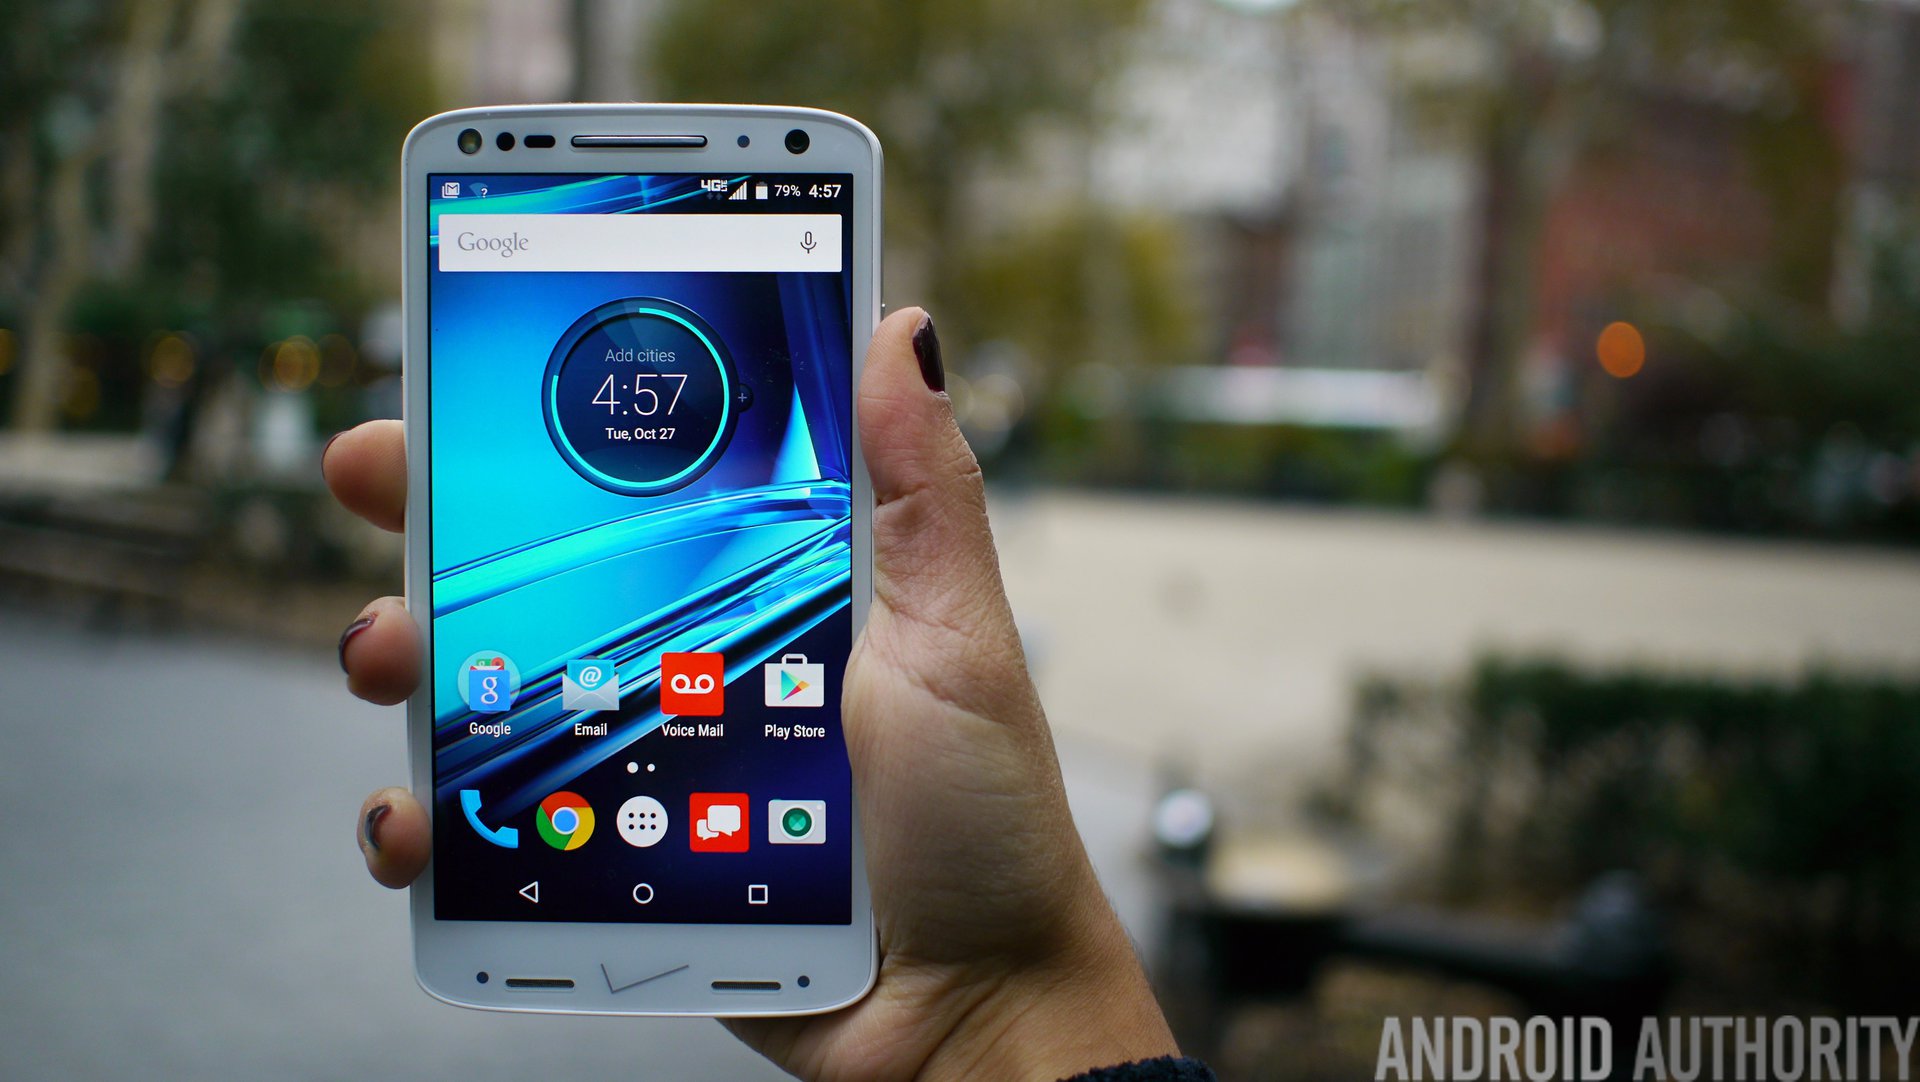 Geval muis breed Motorola Droid Turbo 2 hands-on and first look